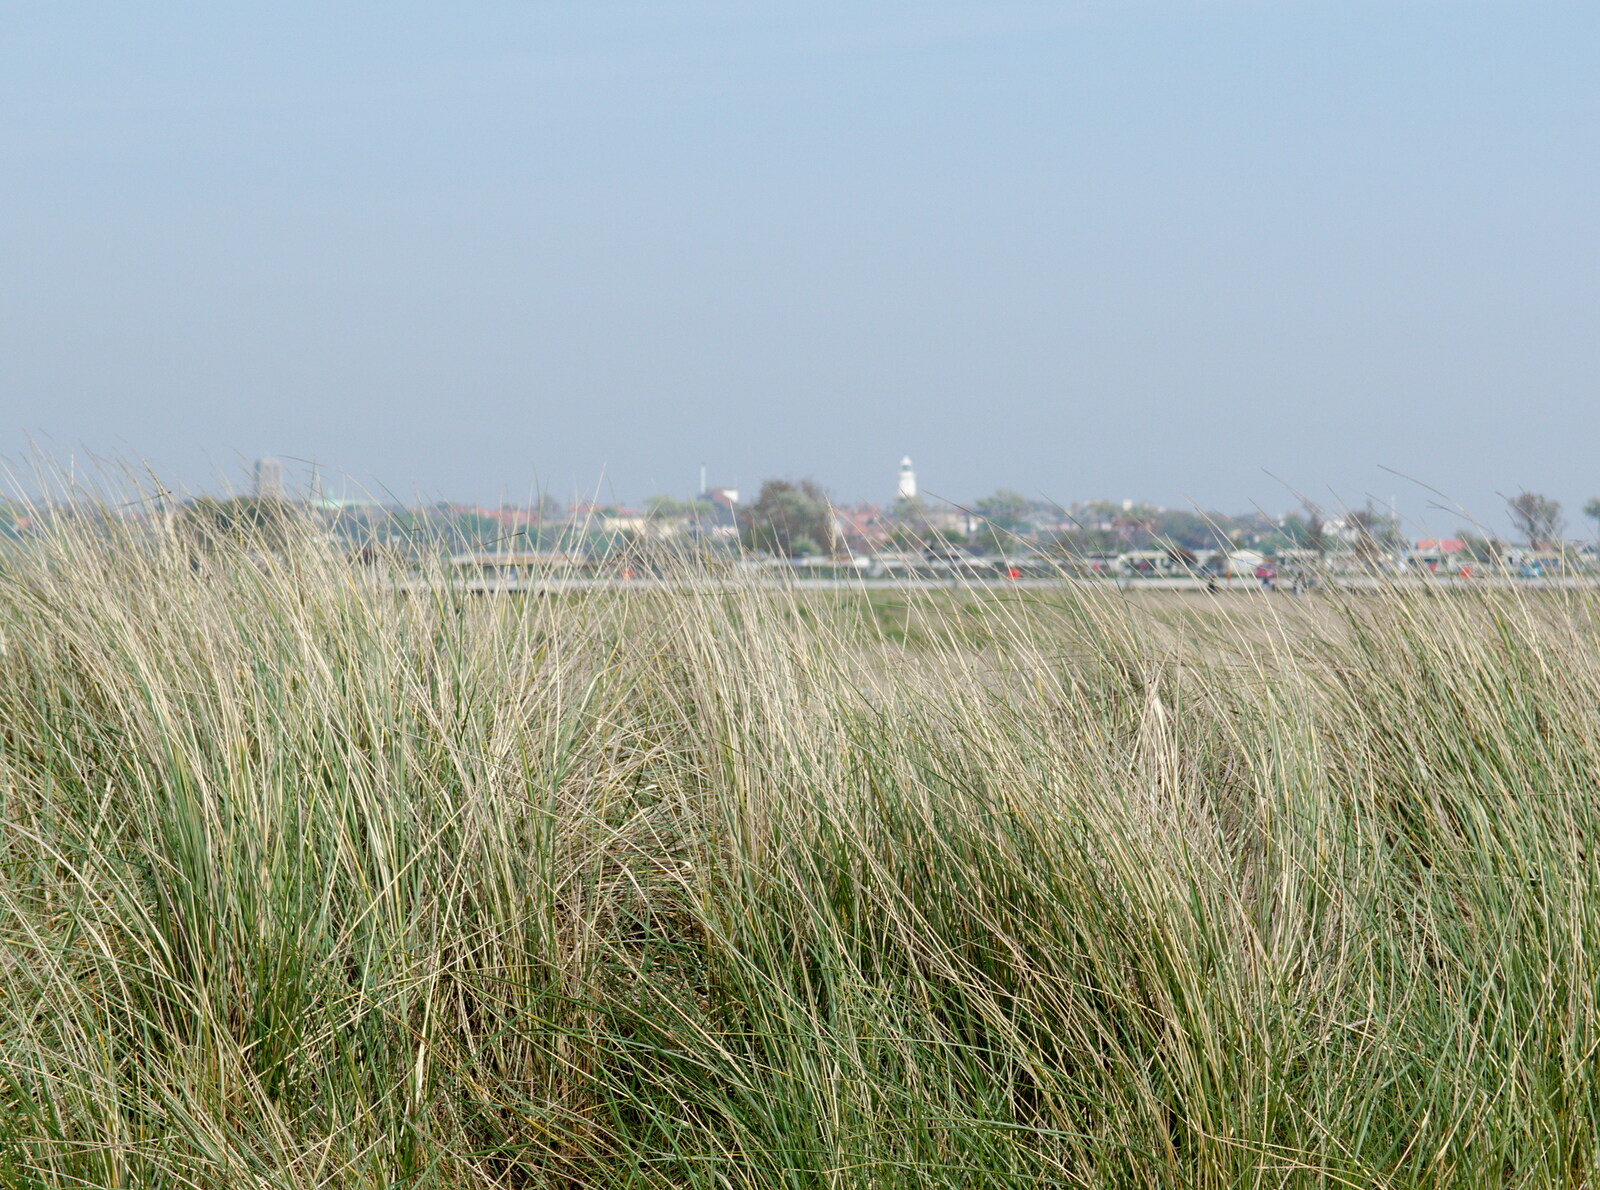 Southwold Lighthouse across the marshes from Life's A Windy Beach, Walberswick, Suffolk - 5th May 2014